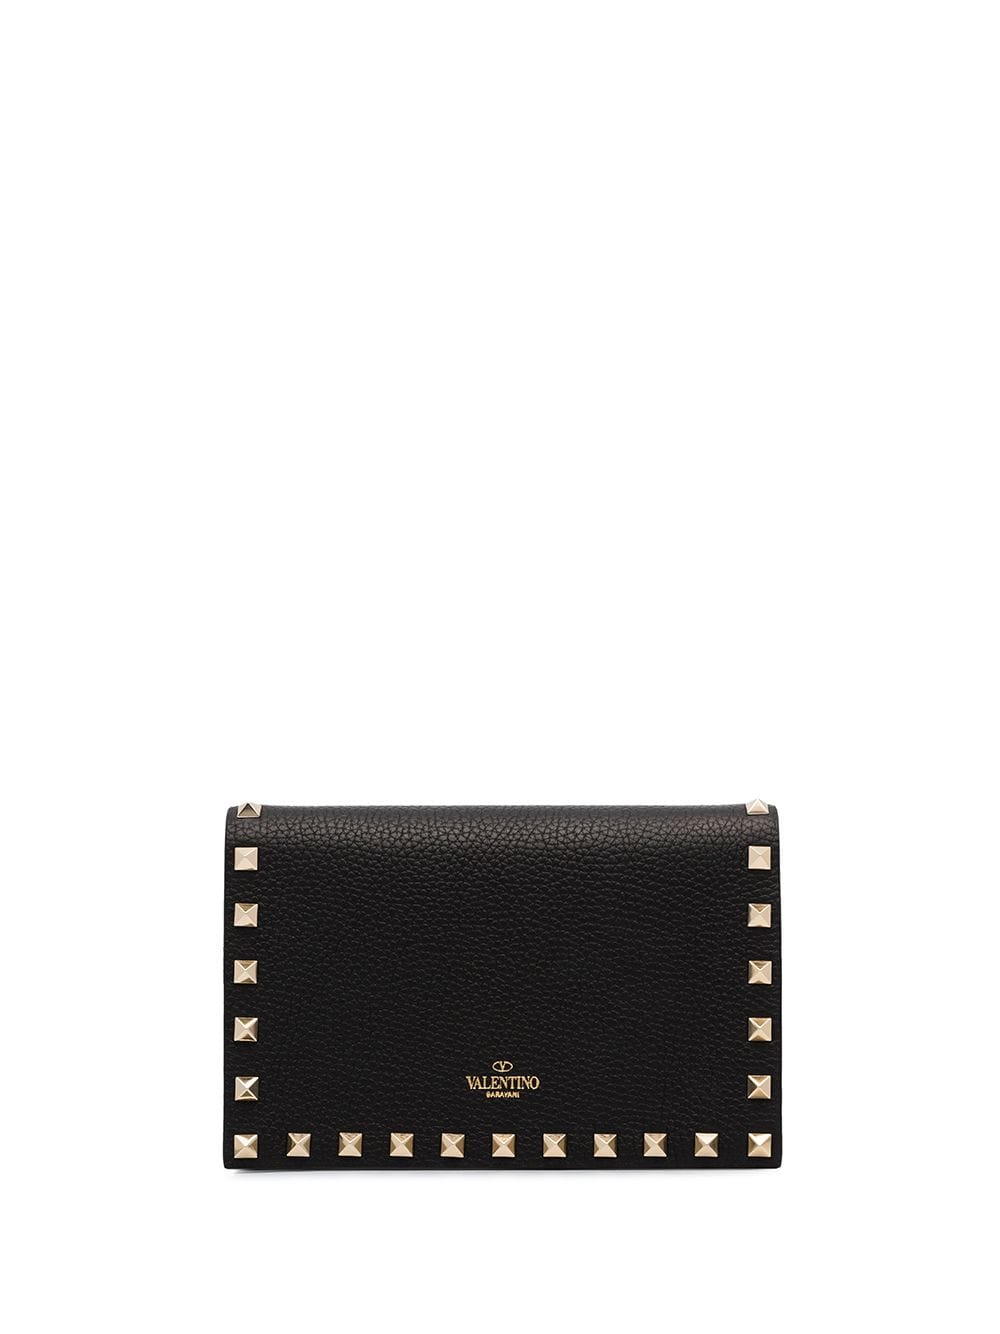 Valentino - Studded Envelope Clutch | ABOUT ICONS